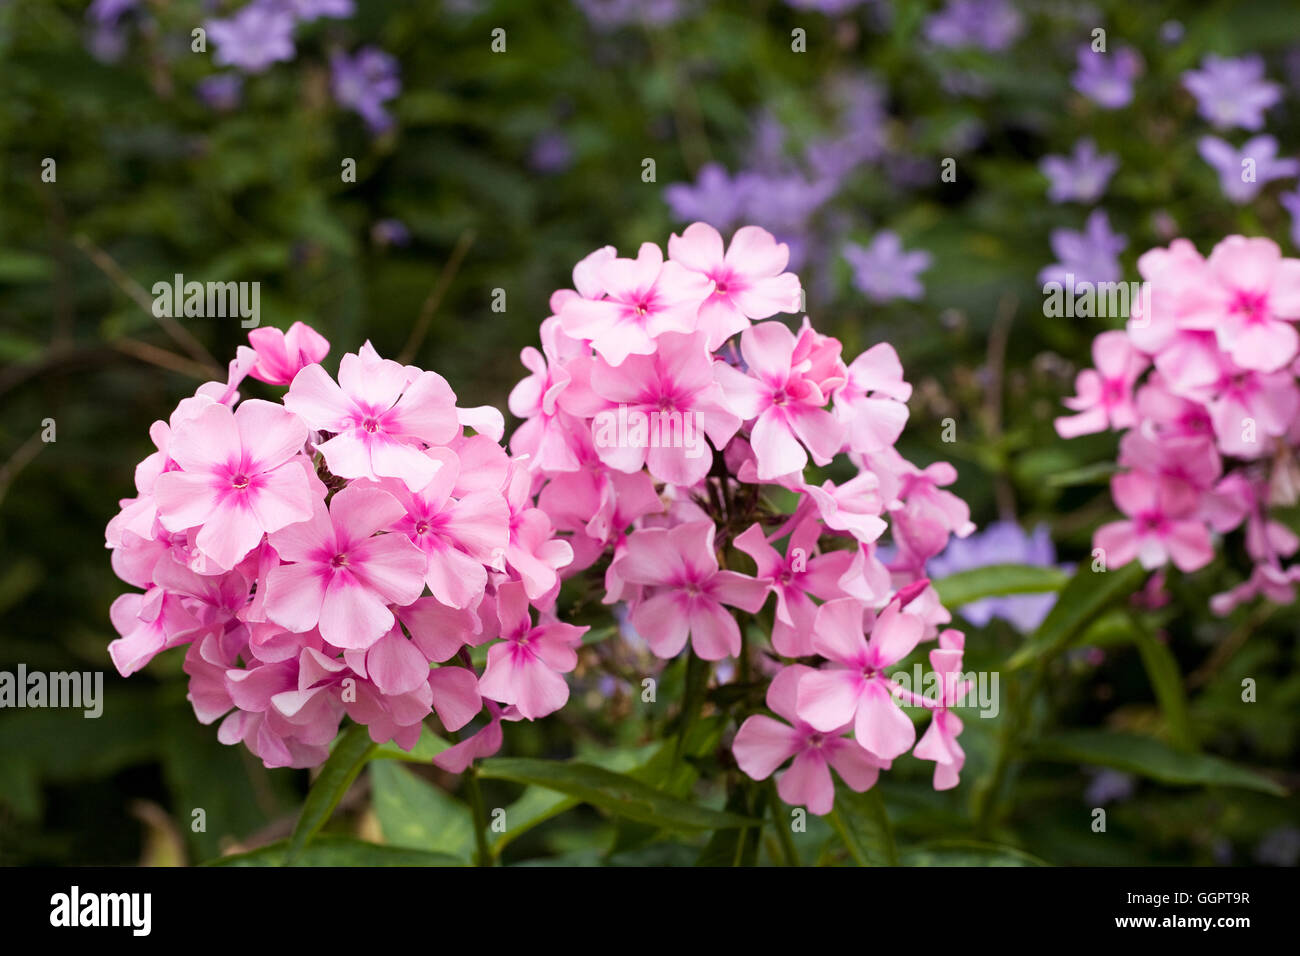 Phlox paniculata 'Glamis' flowers in an herbaceous border. Stock Photo